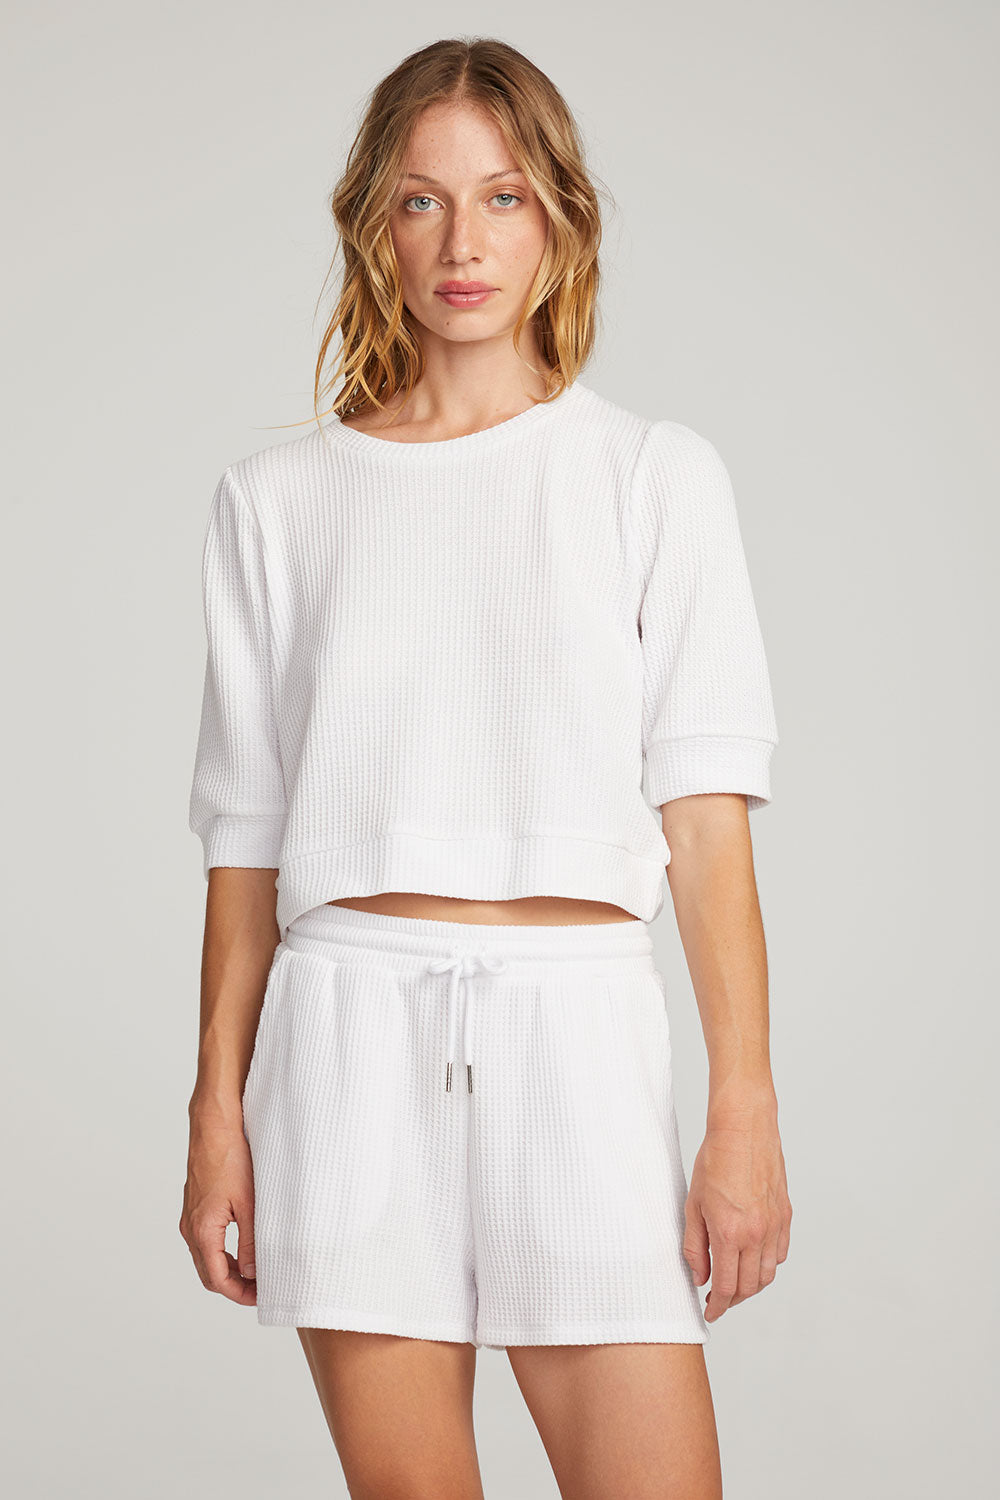 Elyse White Pullover WOMENS chaserbrand